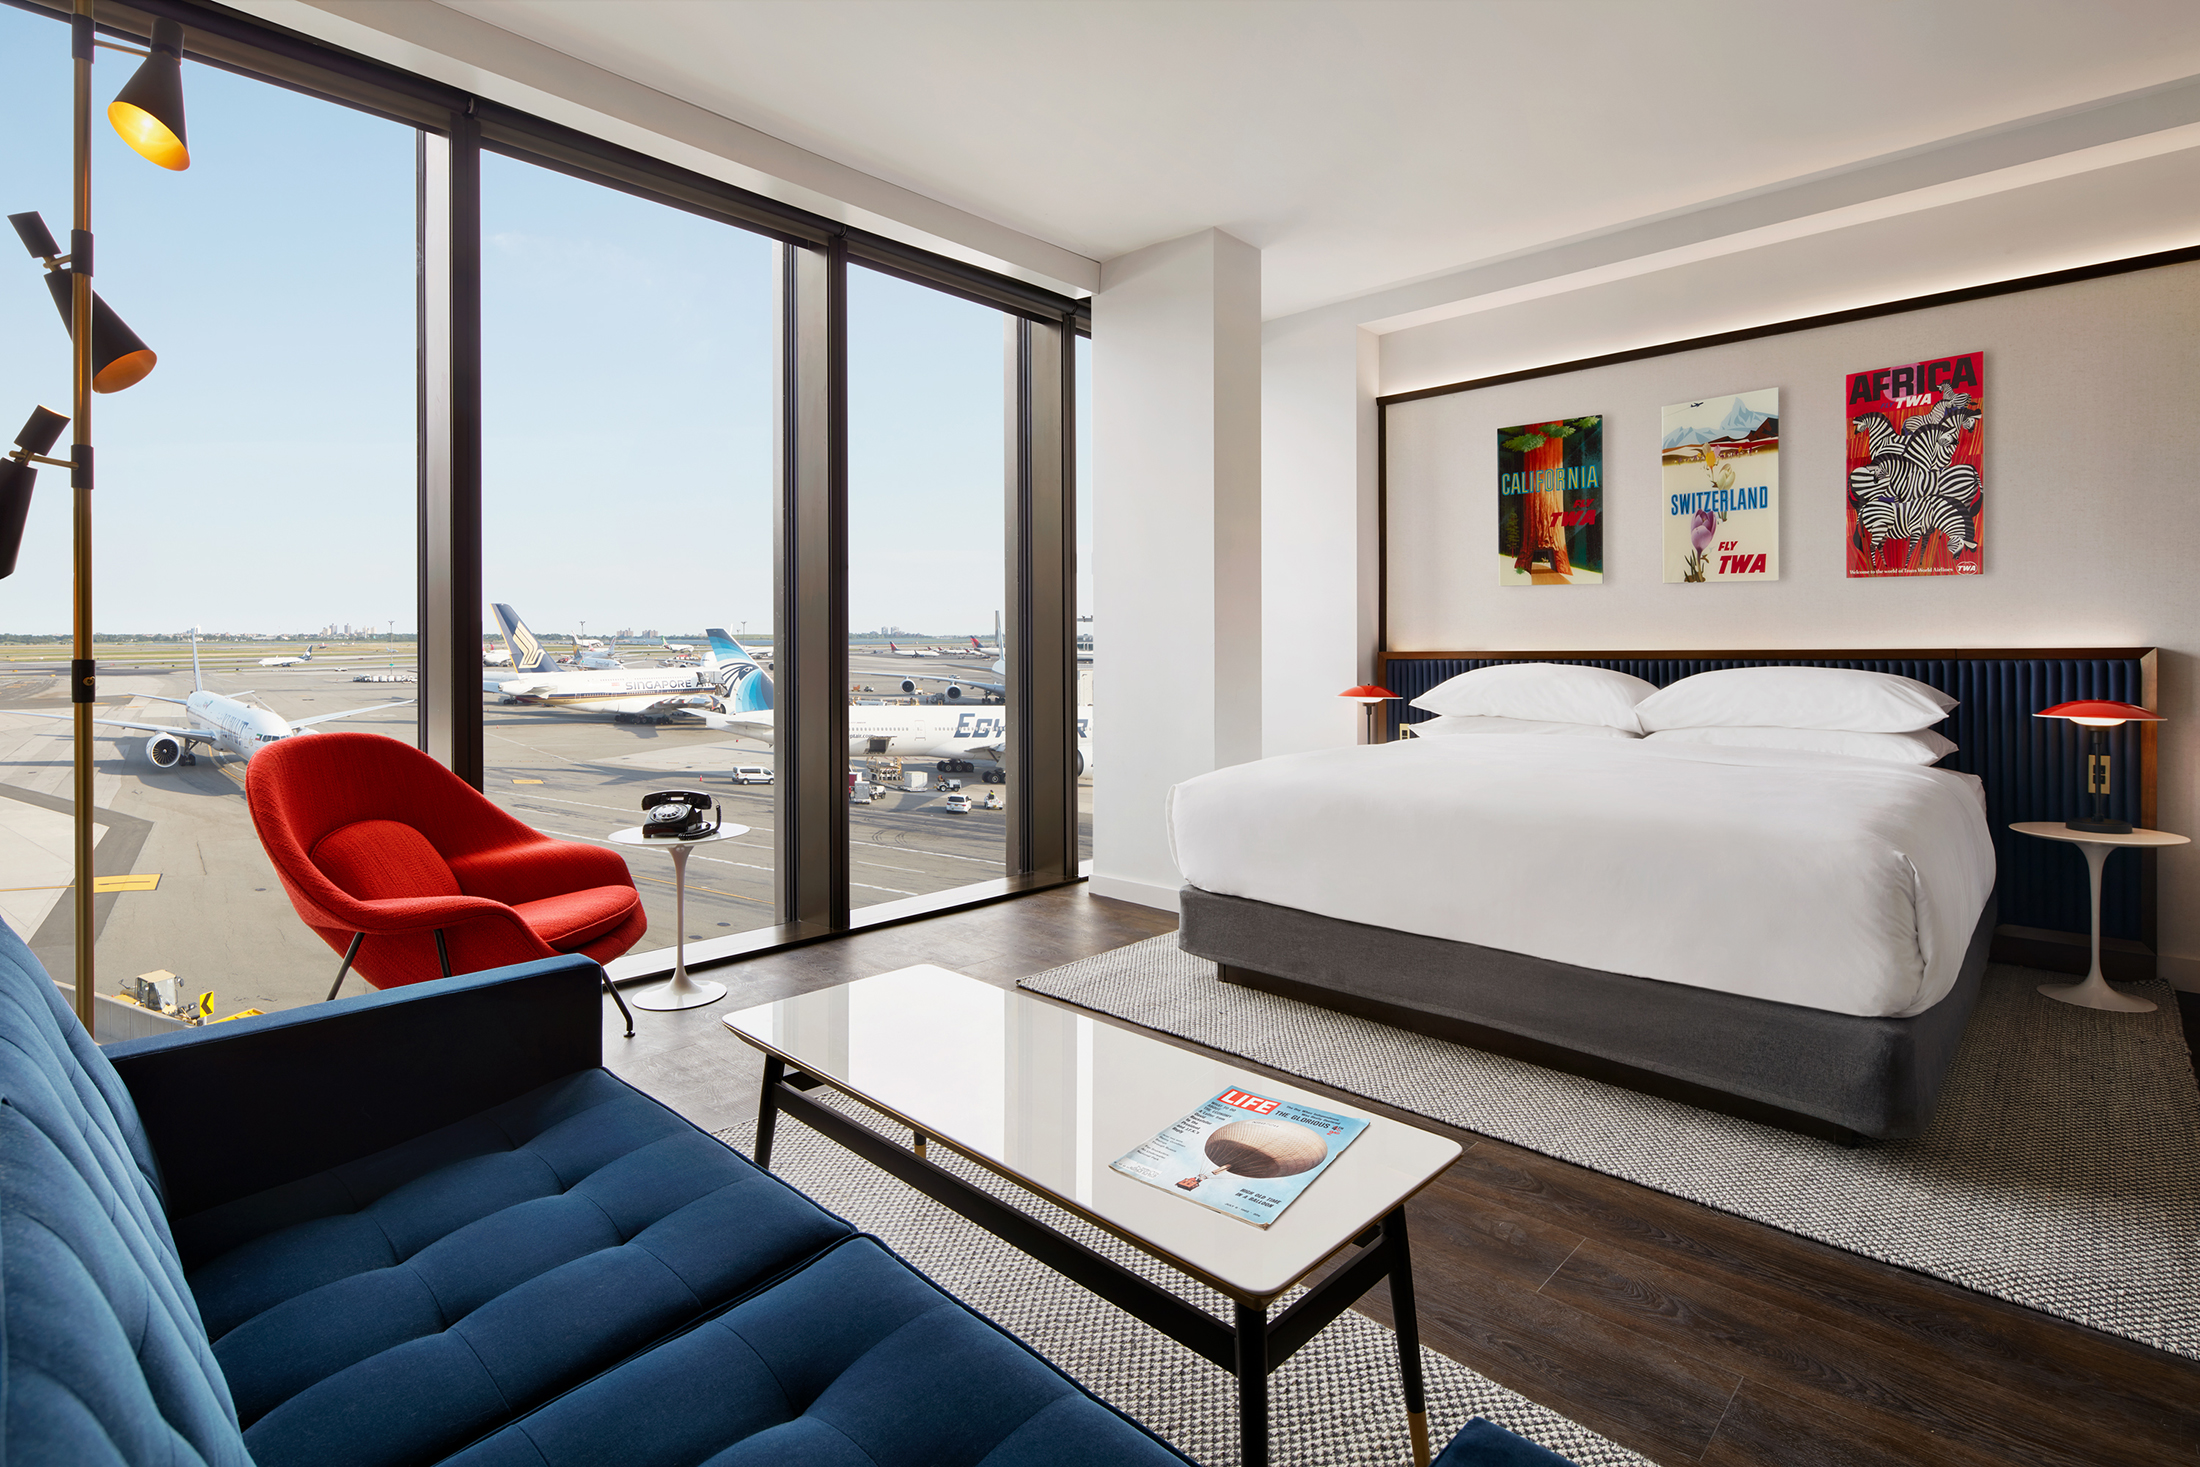 Guest room at TWA Hotel.